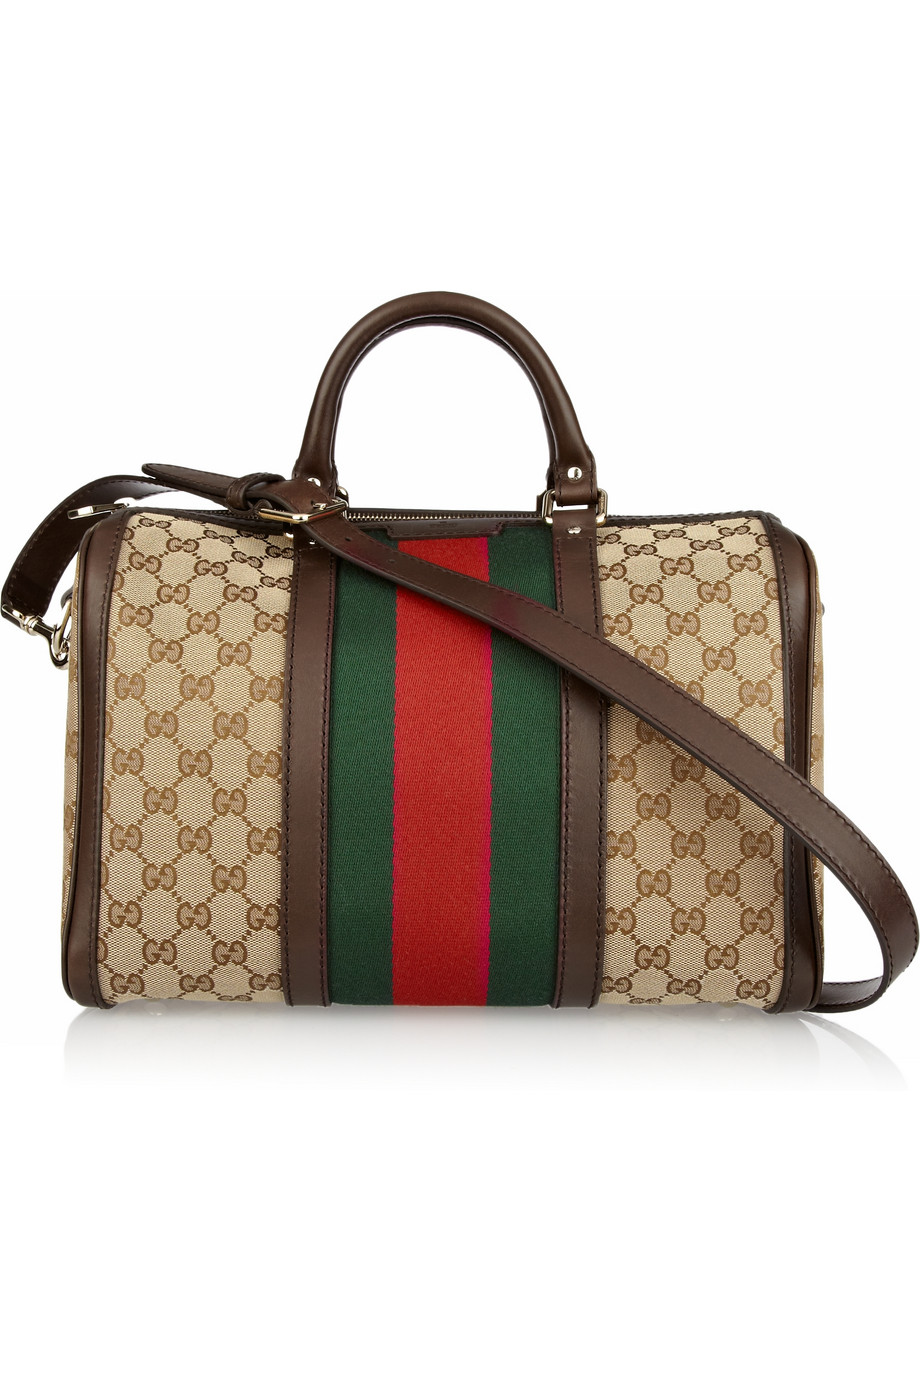 Gucci Vintage Web Boston Monogrammed Canvas Tote in Brown - Lyst